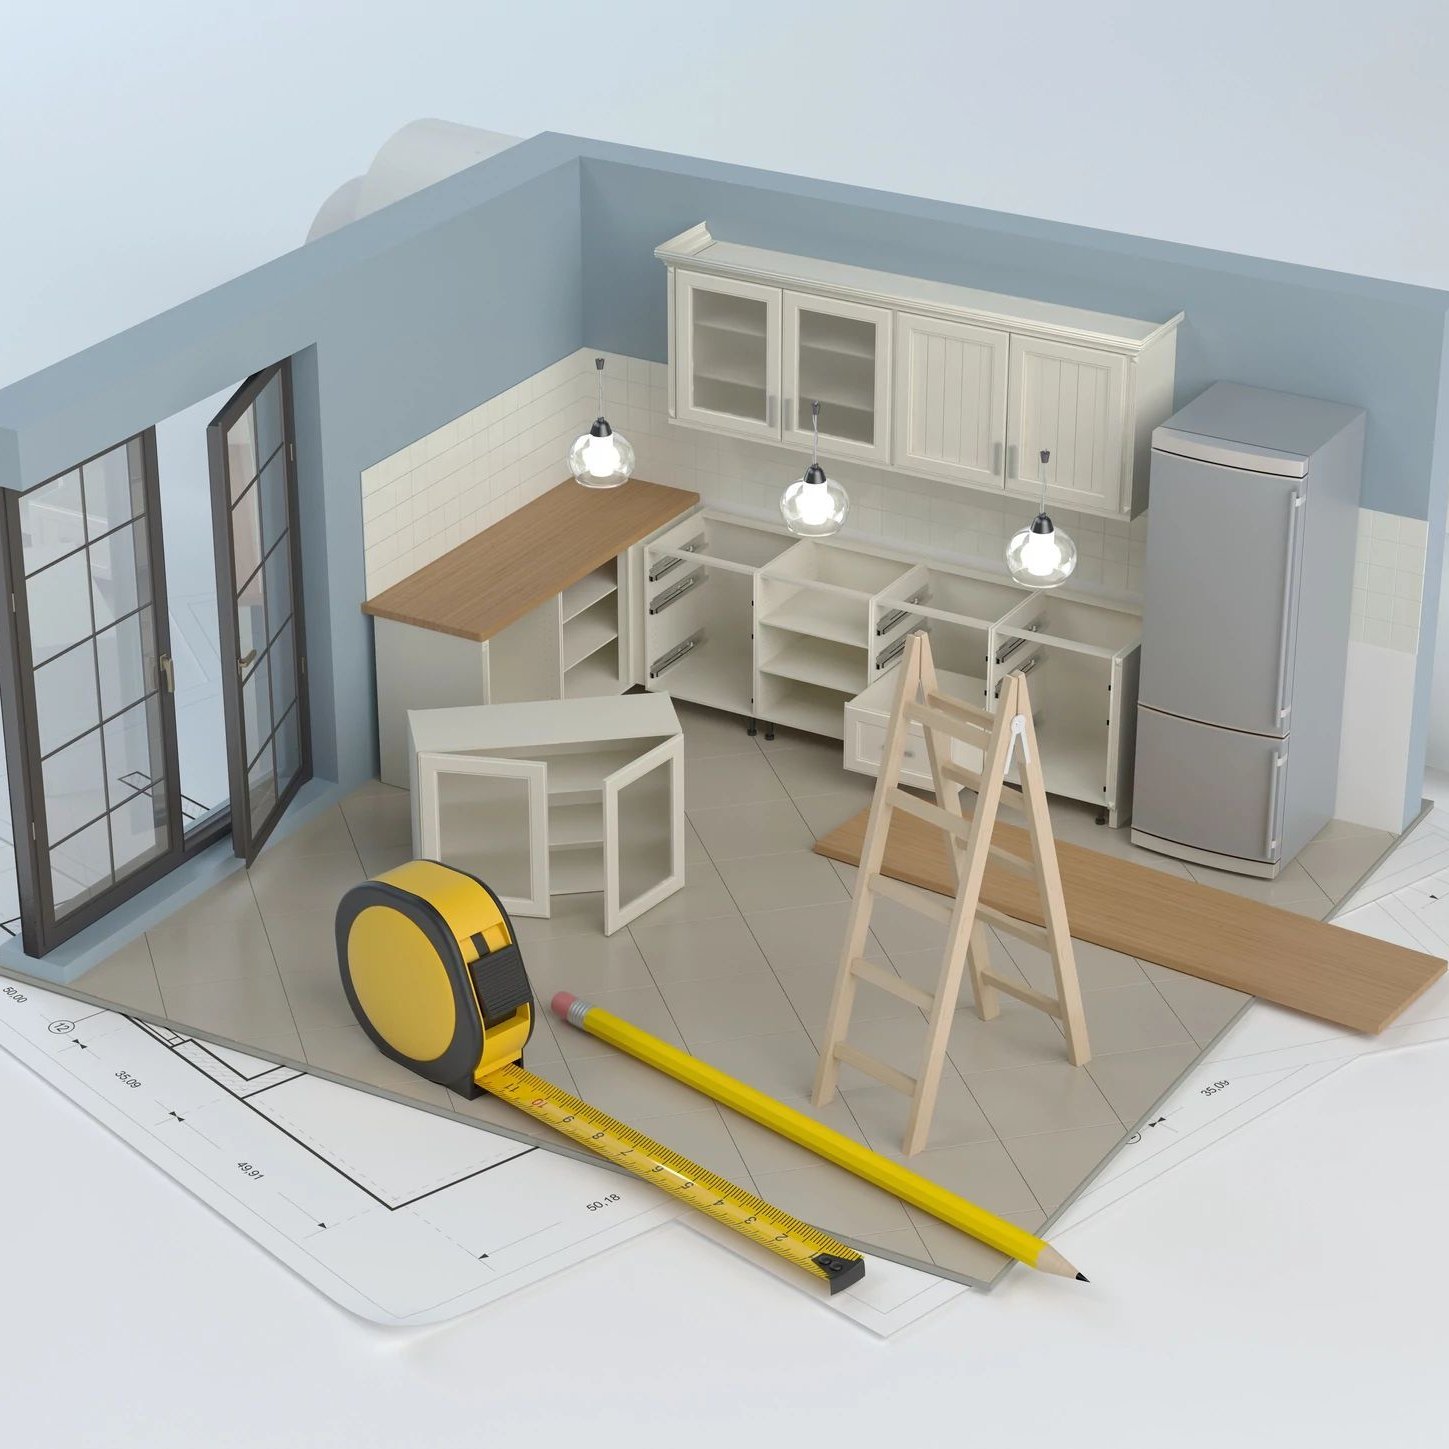 3D model of a kitchen from The Carpet Yard in McLean, VA